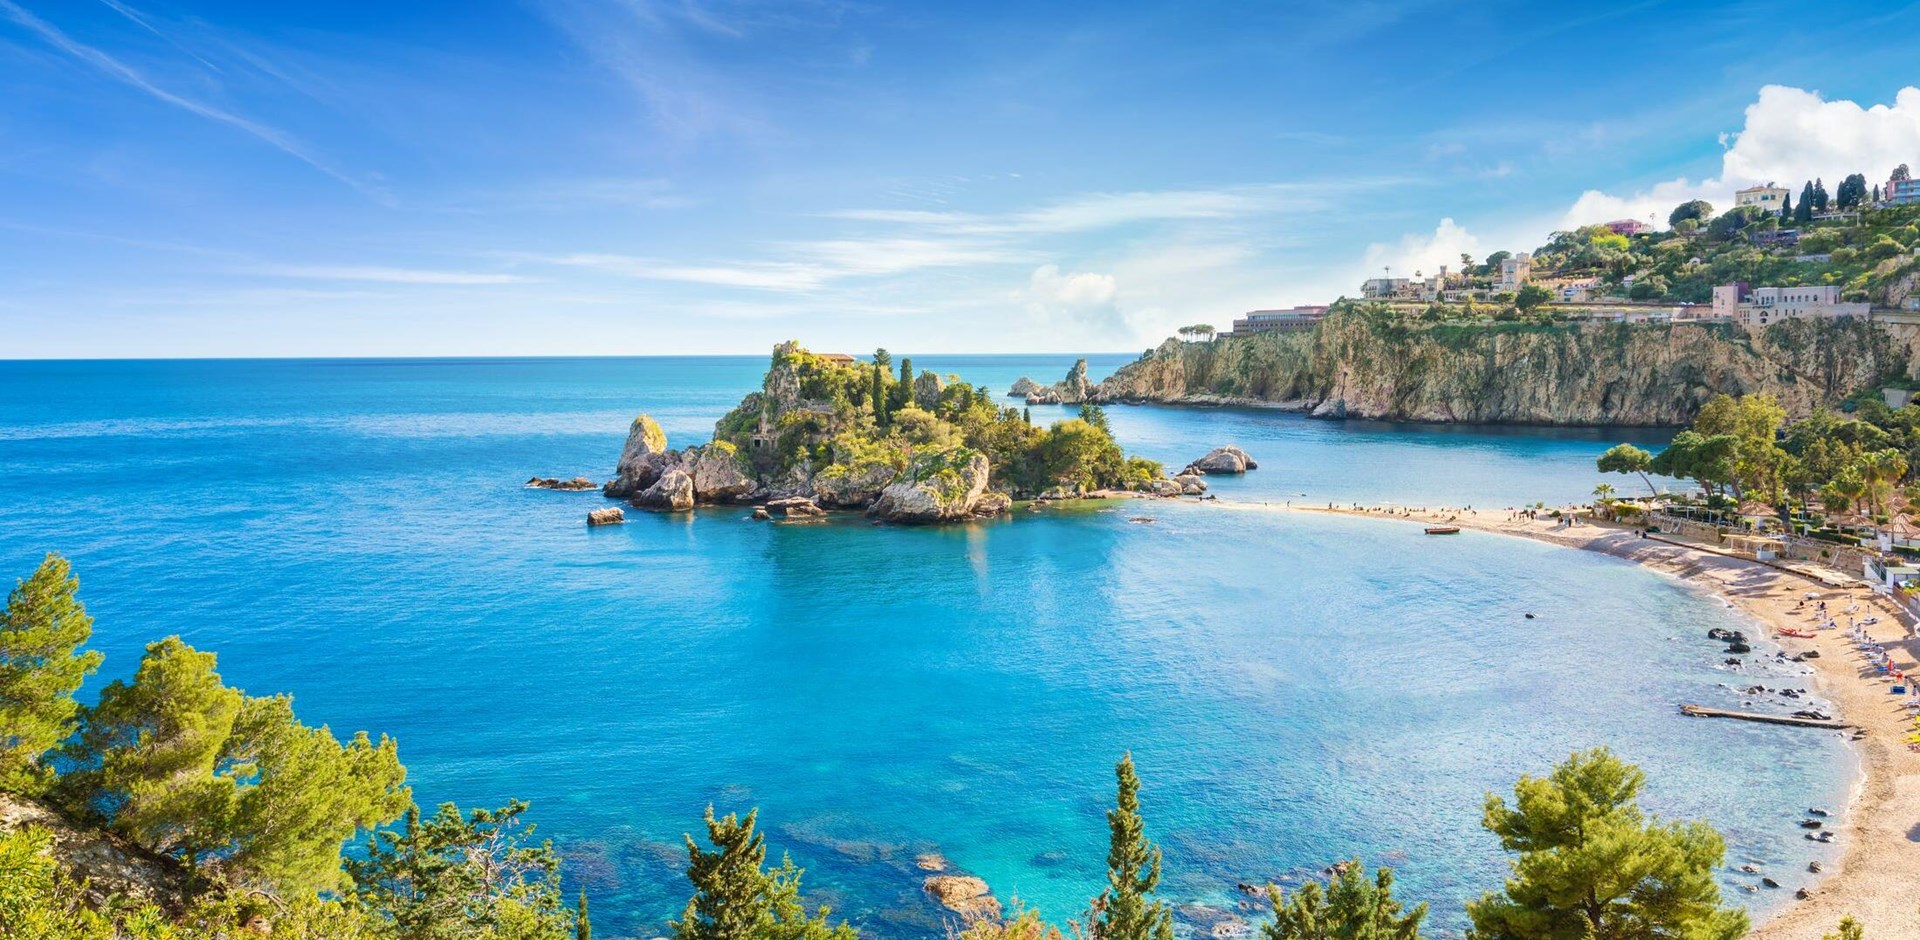 Panoramic view of Isola Bella small island near Taormina, Sicily, Italy. Narrow path connects island to mainland Taormina beach surrounded by azure waters of the Ionian Sea.